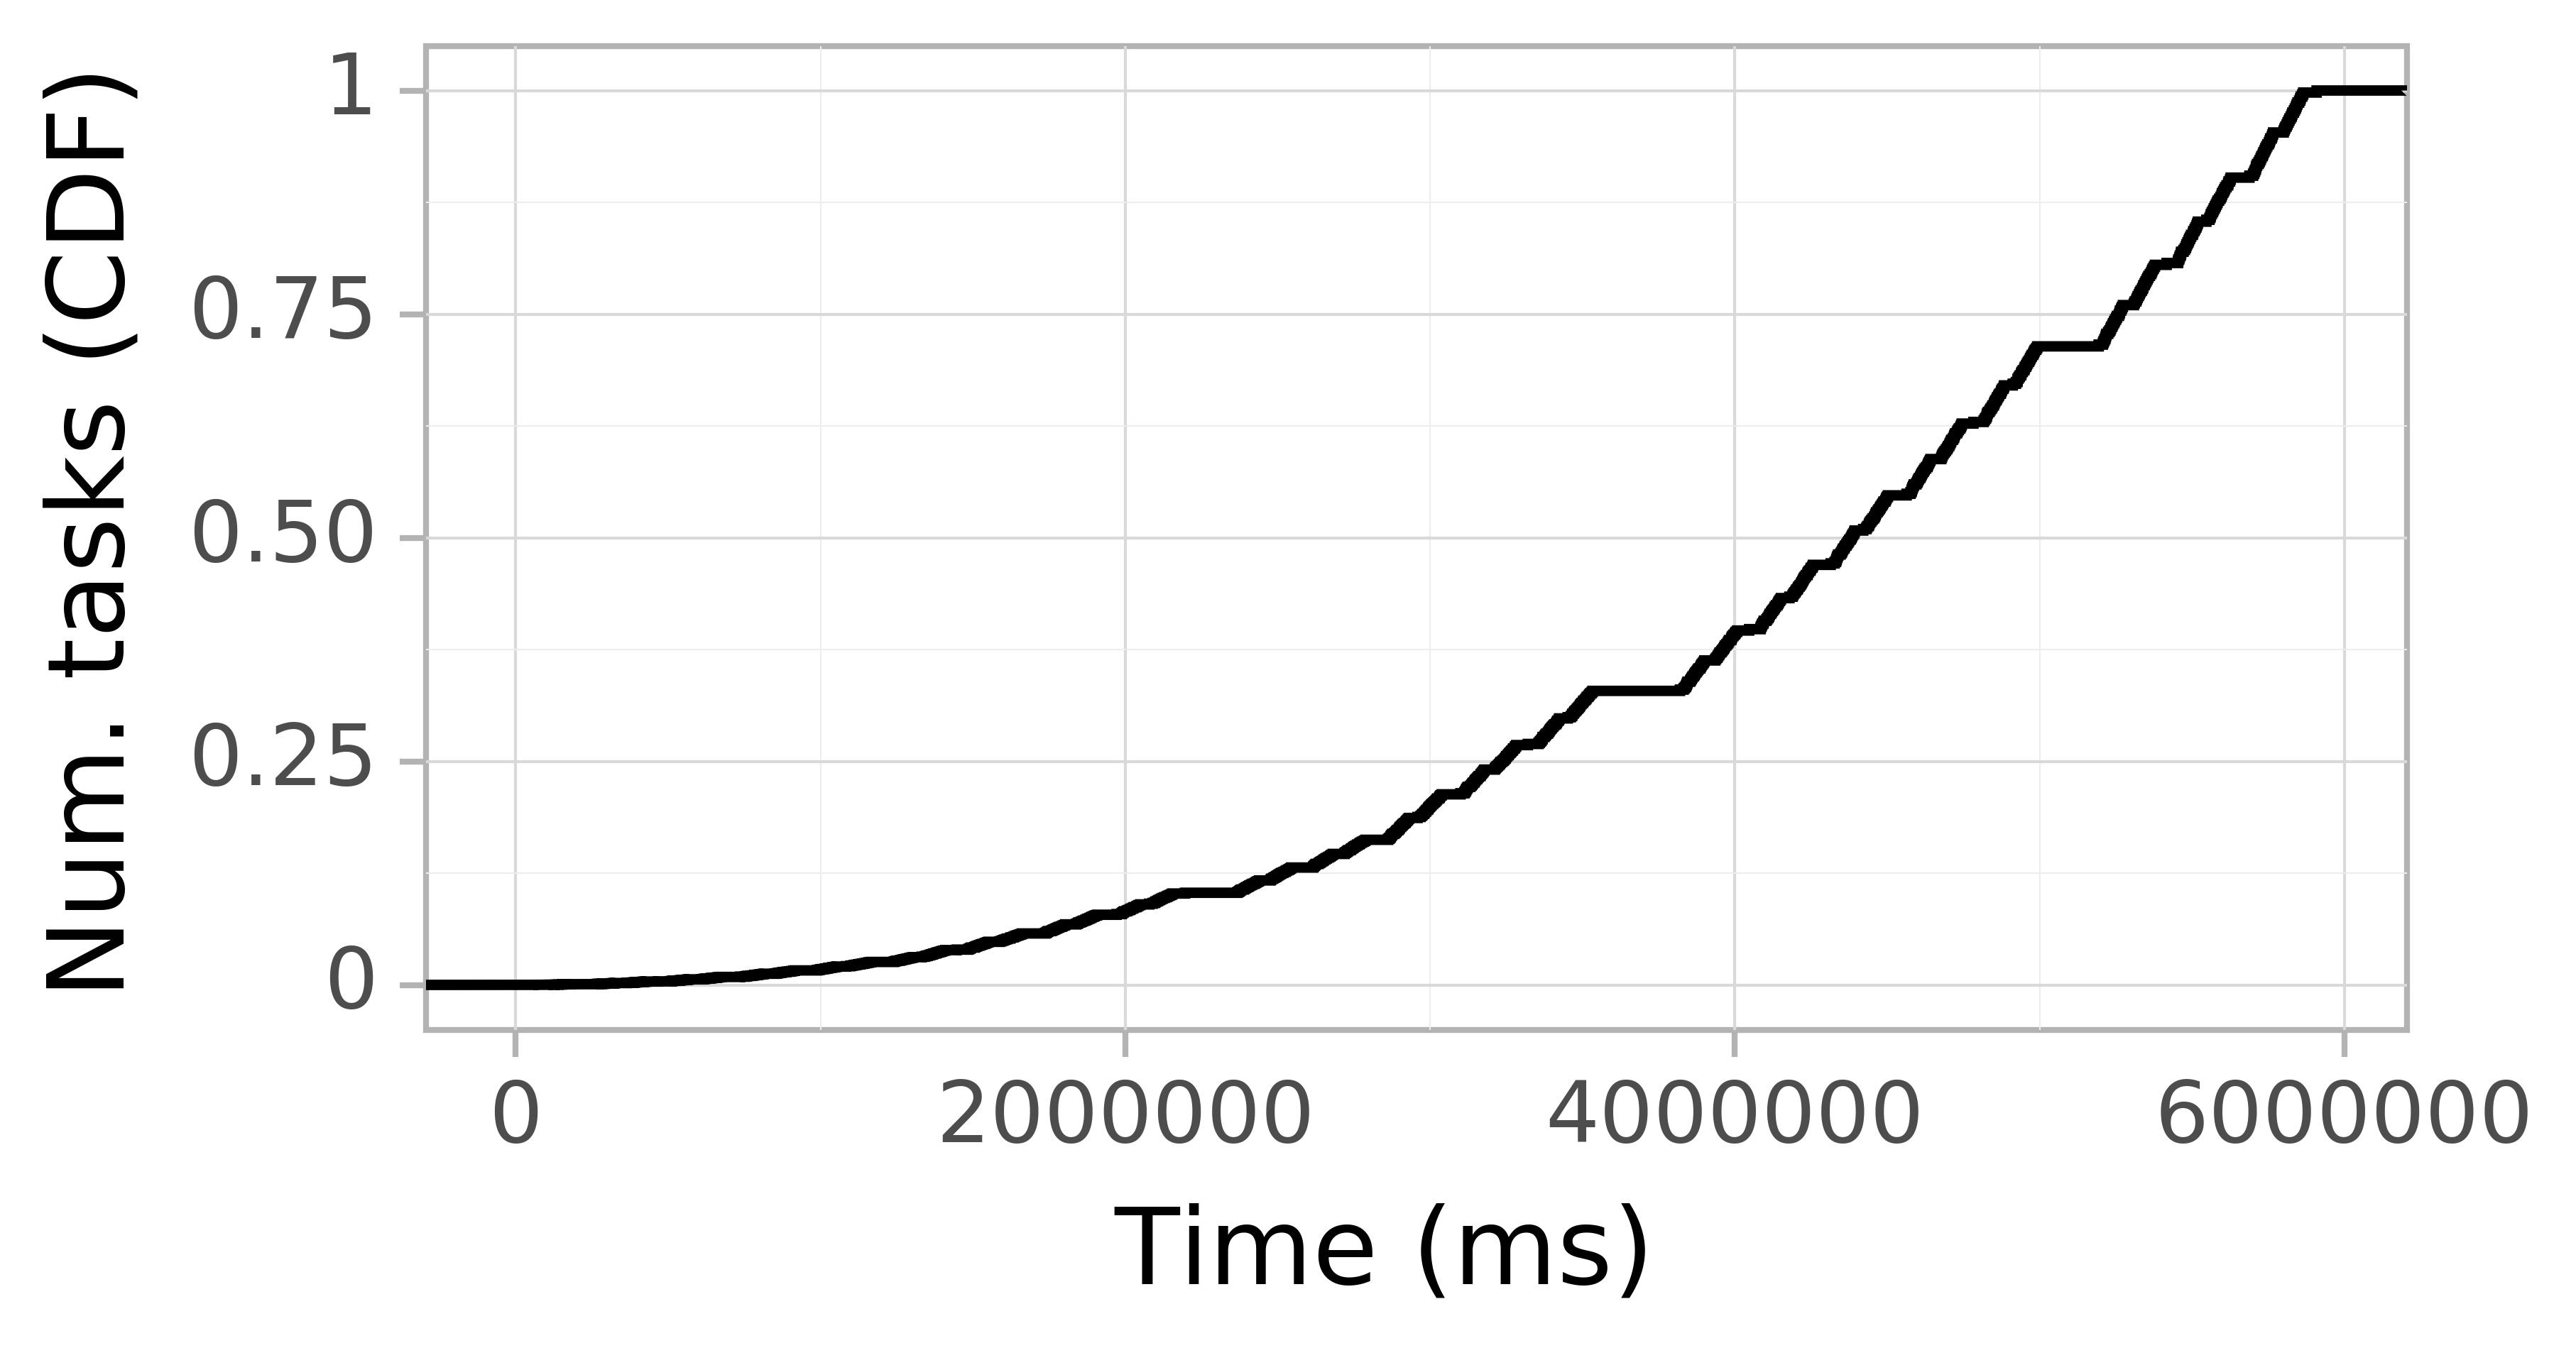 Task arrival CDF graph for the askalon-new_ee24 trace.